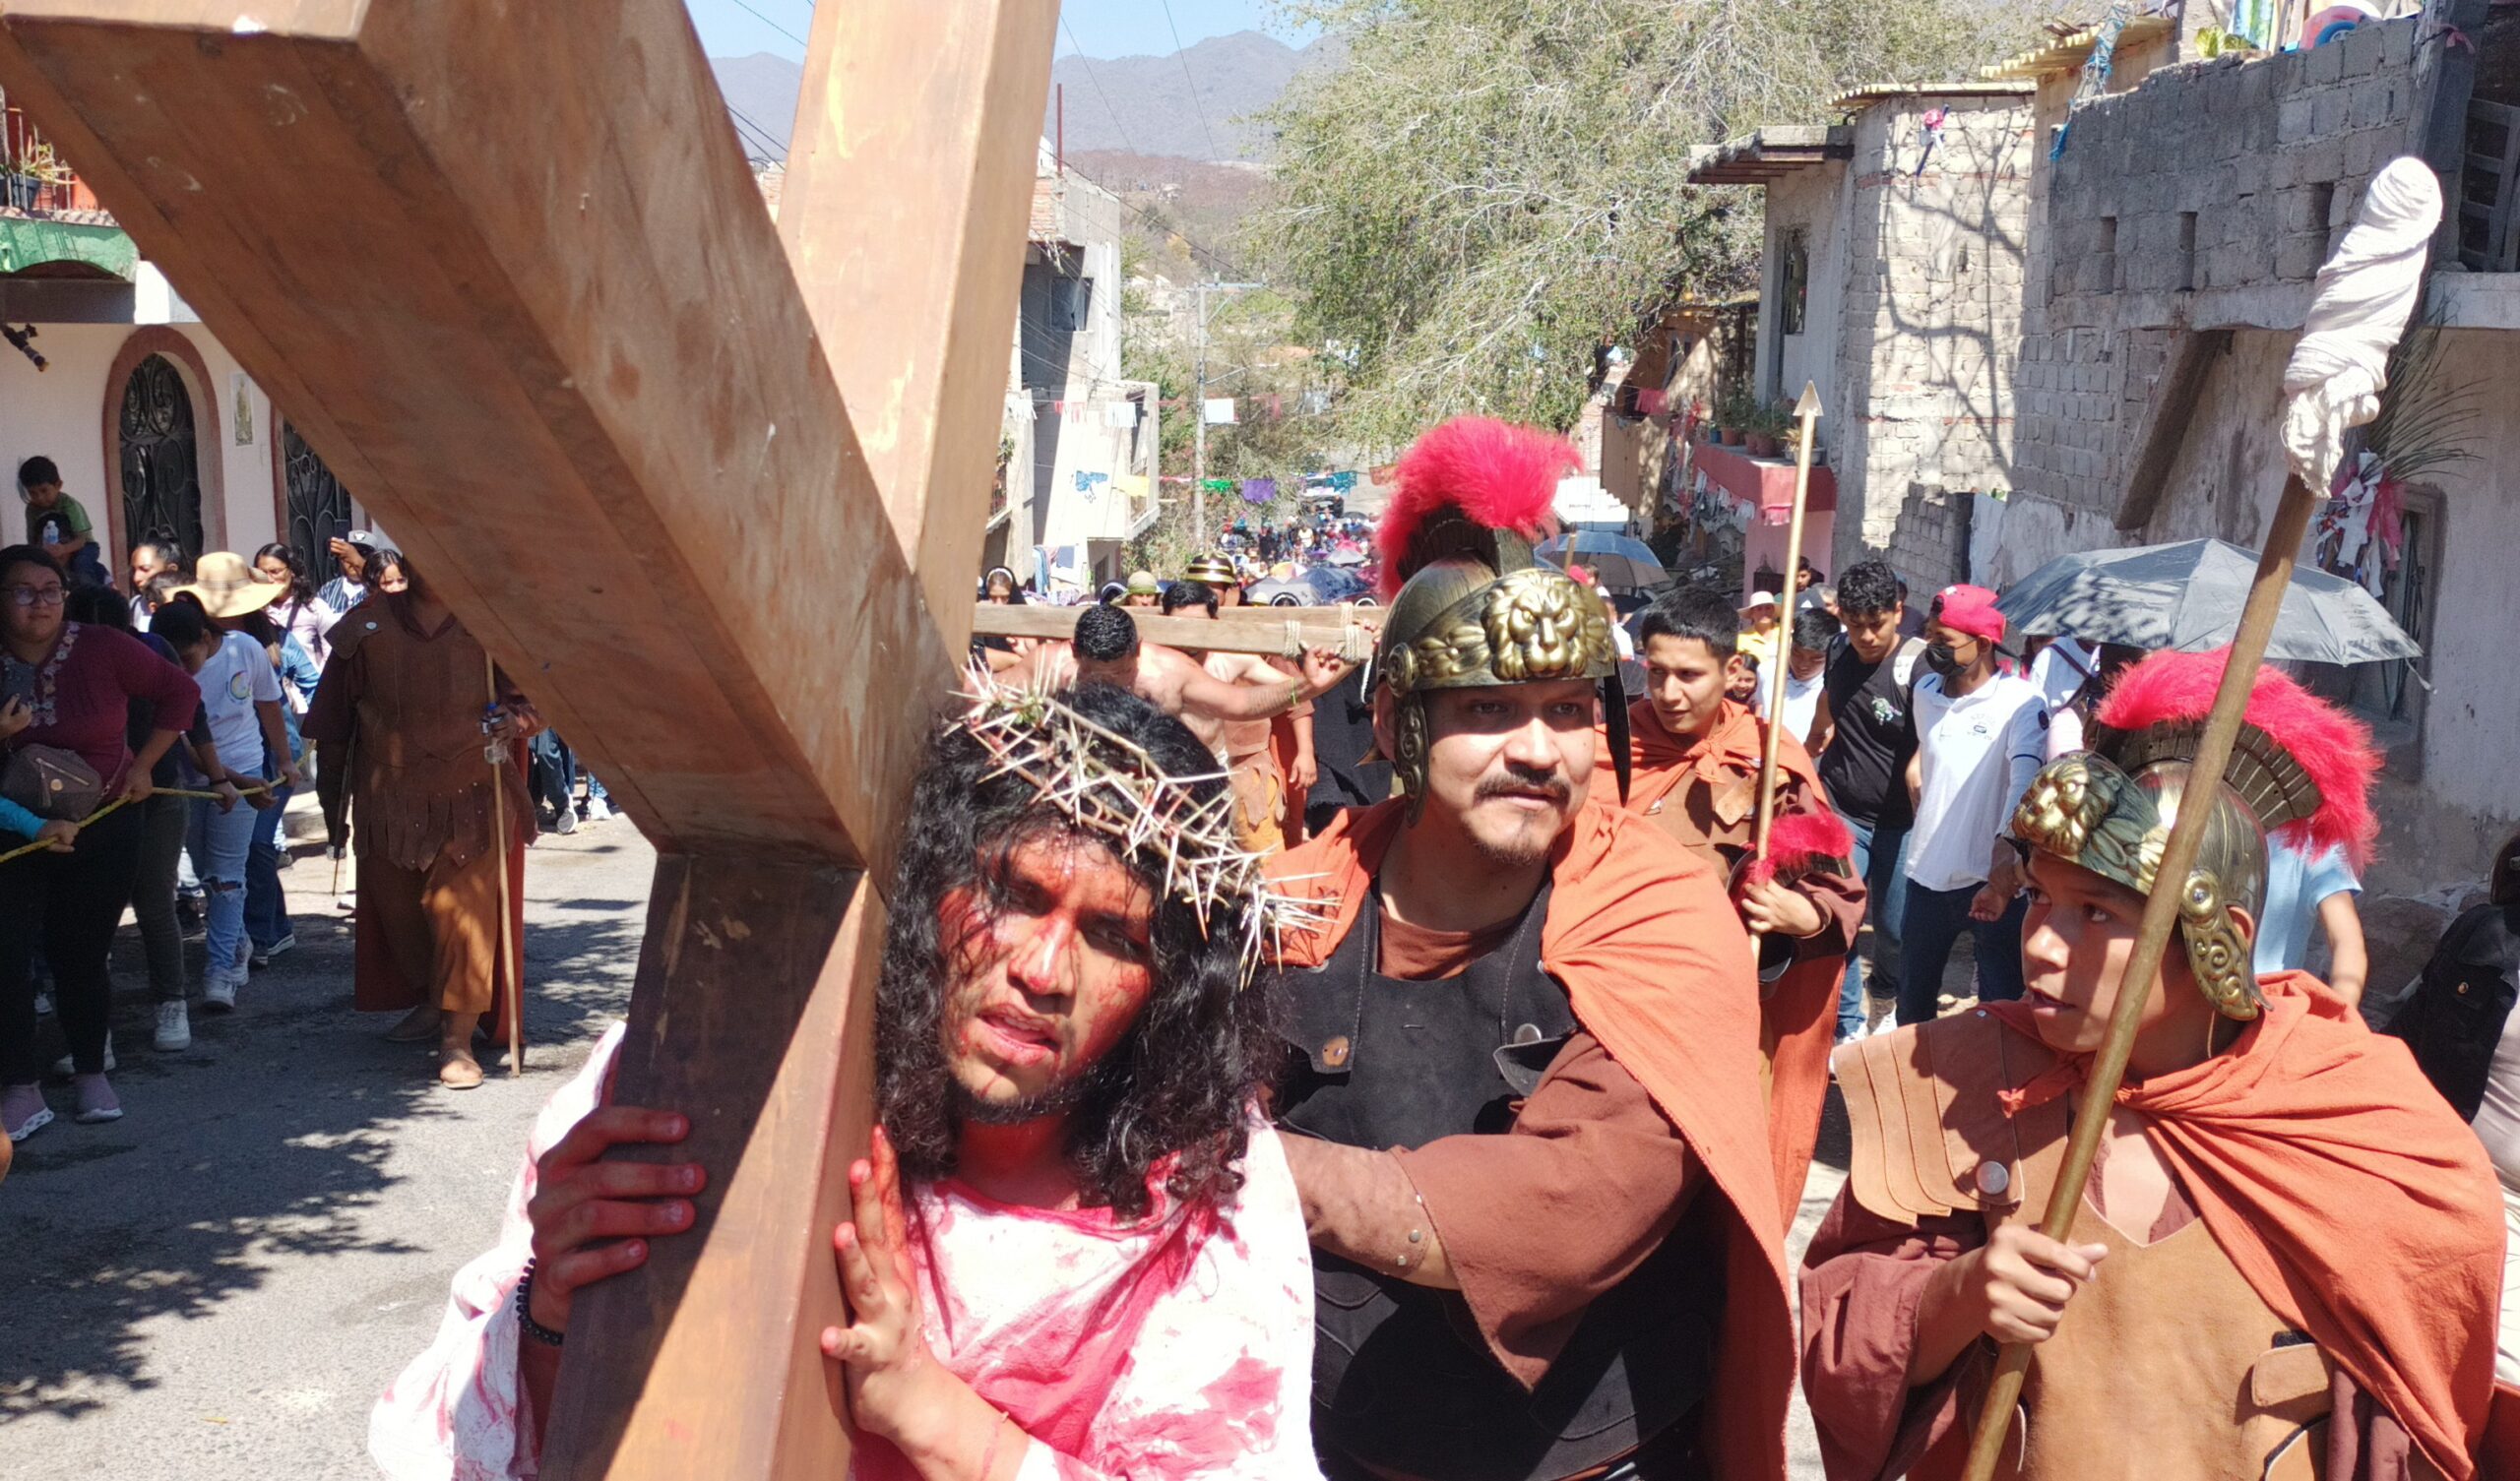 Change of venue for Chapala’s crucifixion and Viacrucis